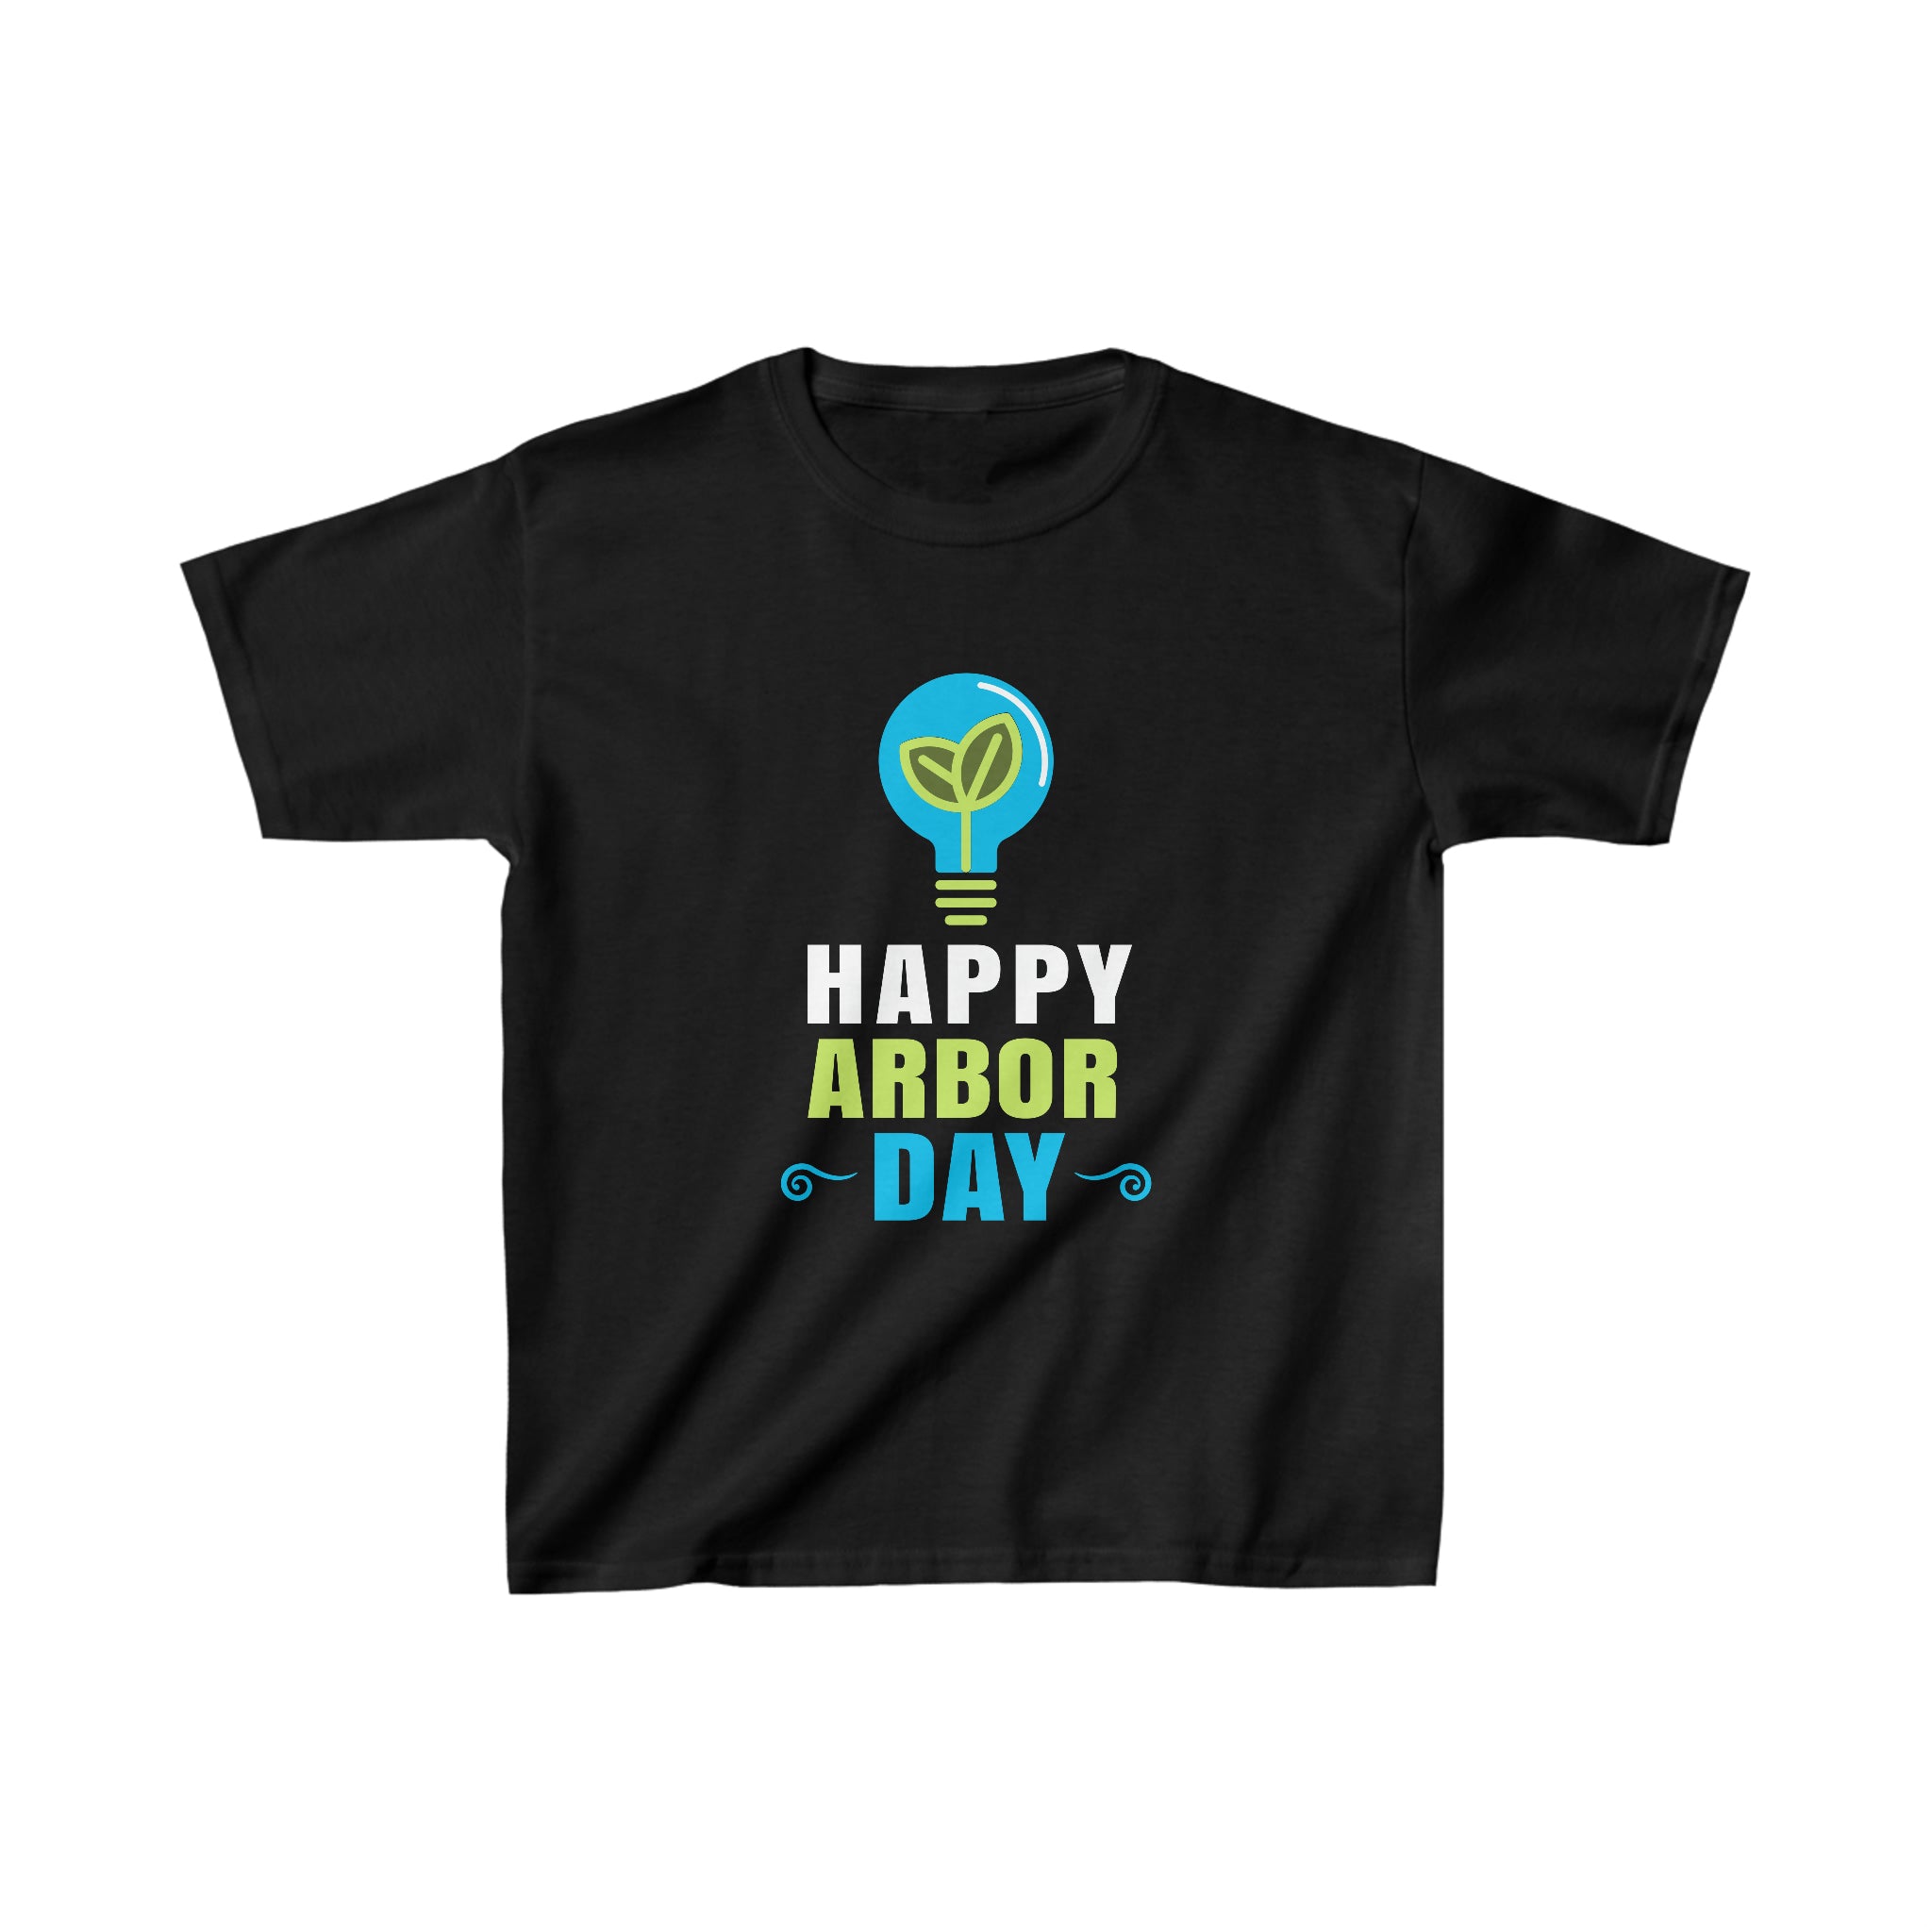 Happy Earth Day Shirts Happy Arbor Day TShirt Earth Day Shirts for Girls